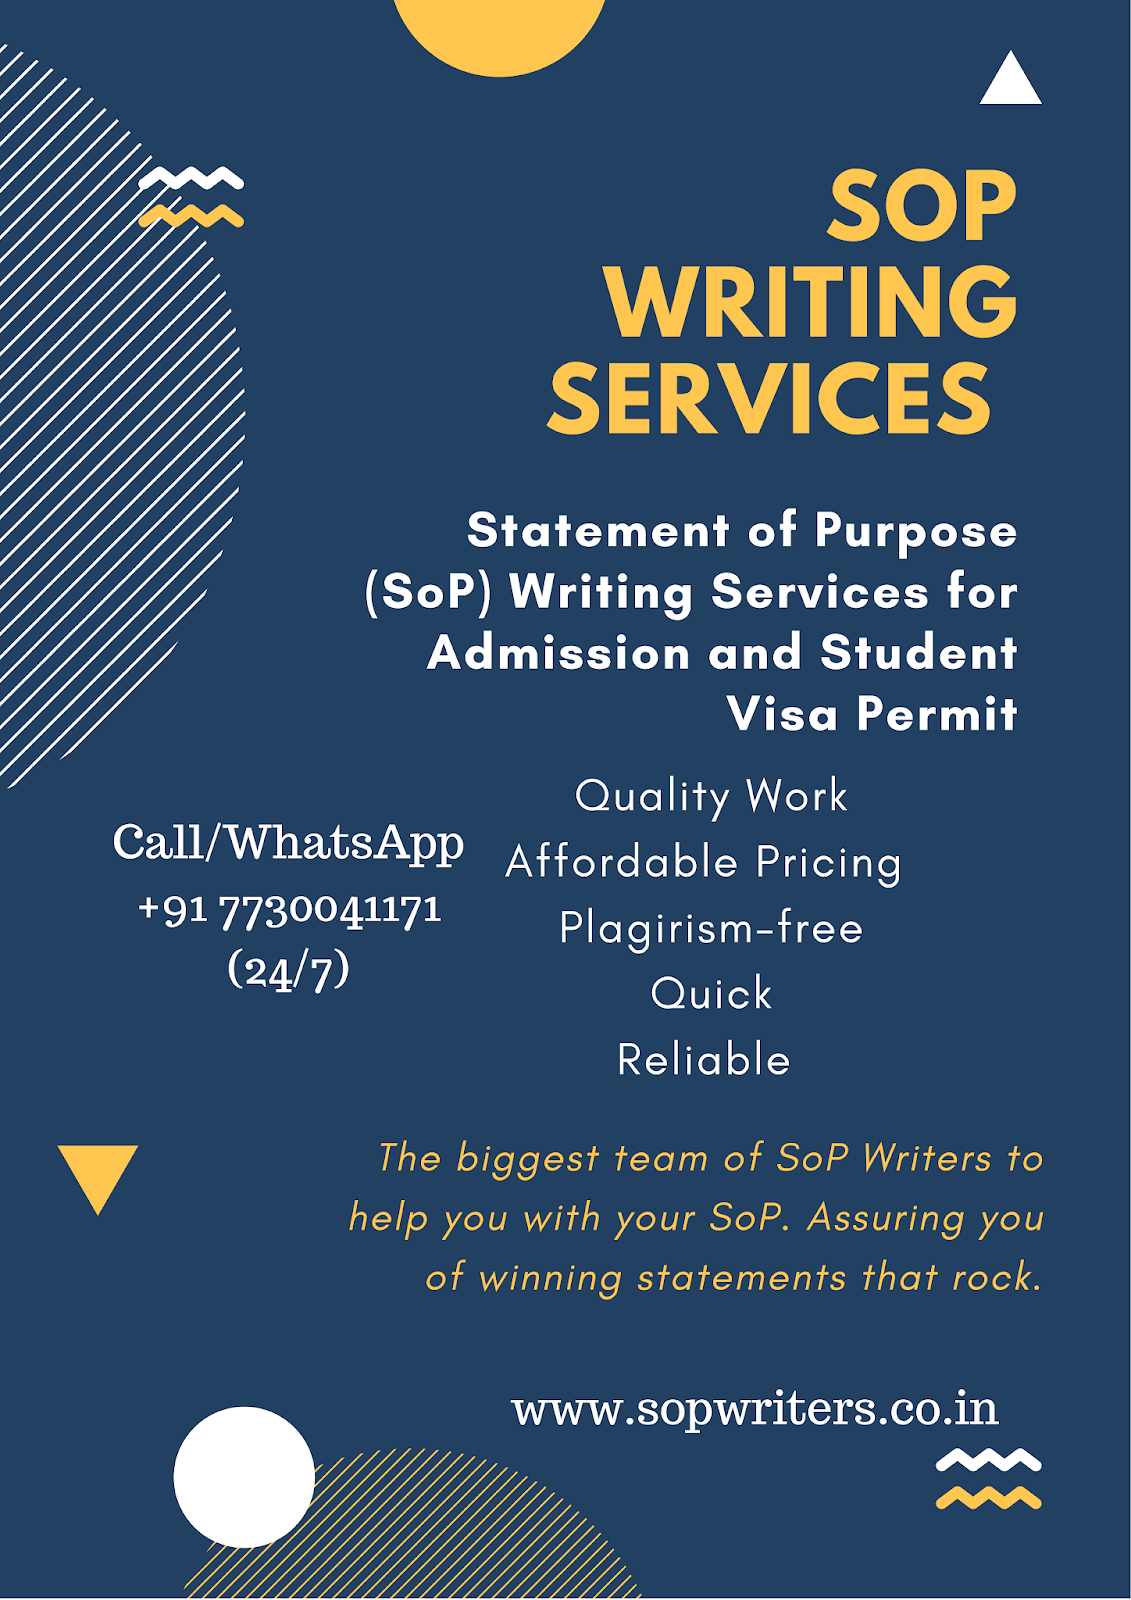 sop writing services pune